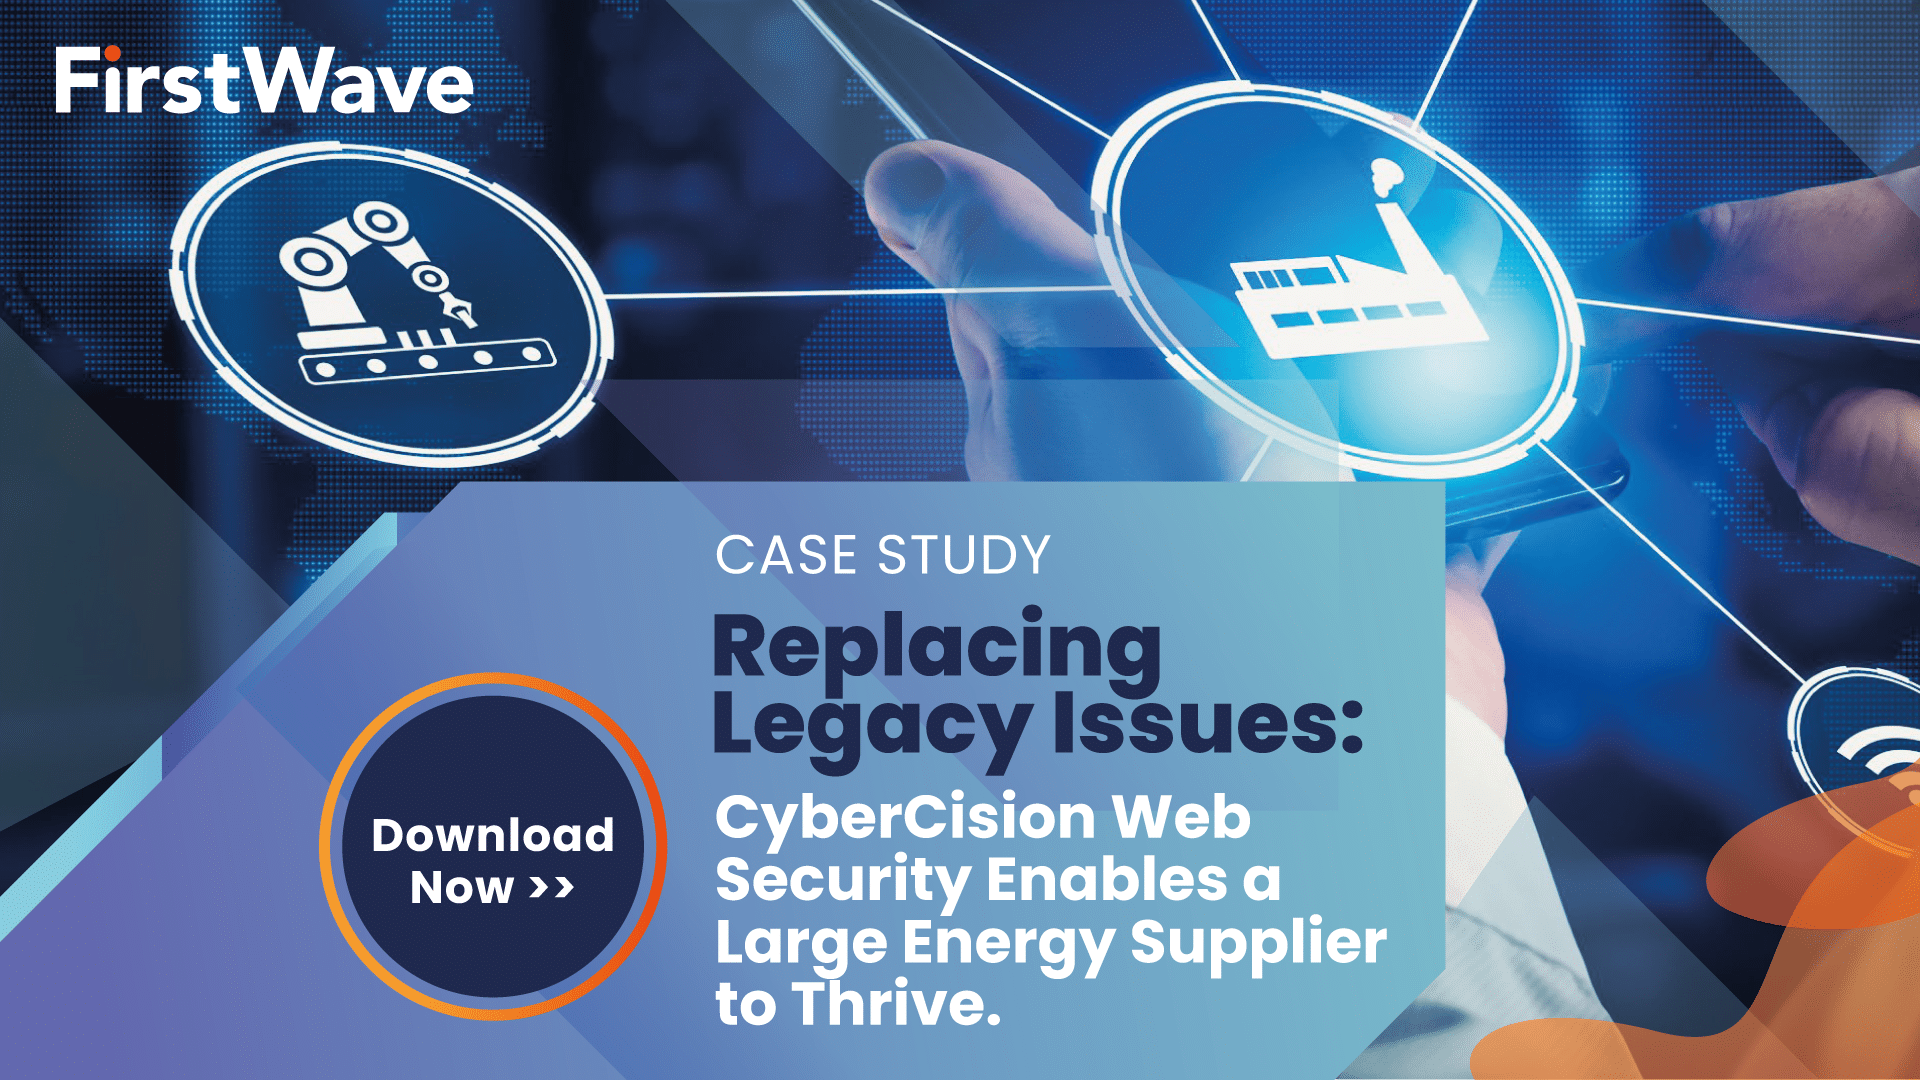 [Case Study] Large Energy Supplier Ensures Bright Future with CyberCision Web Security